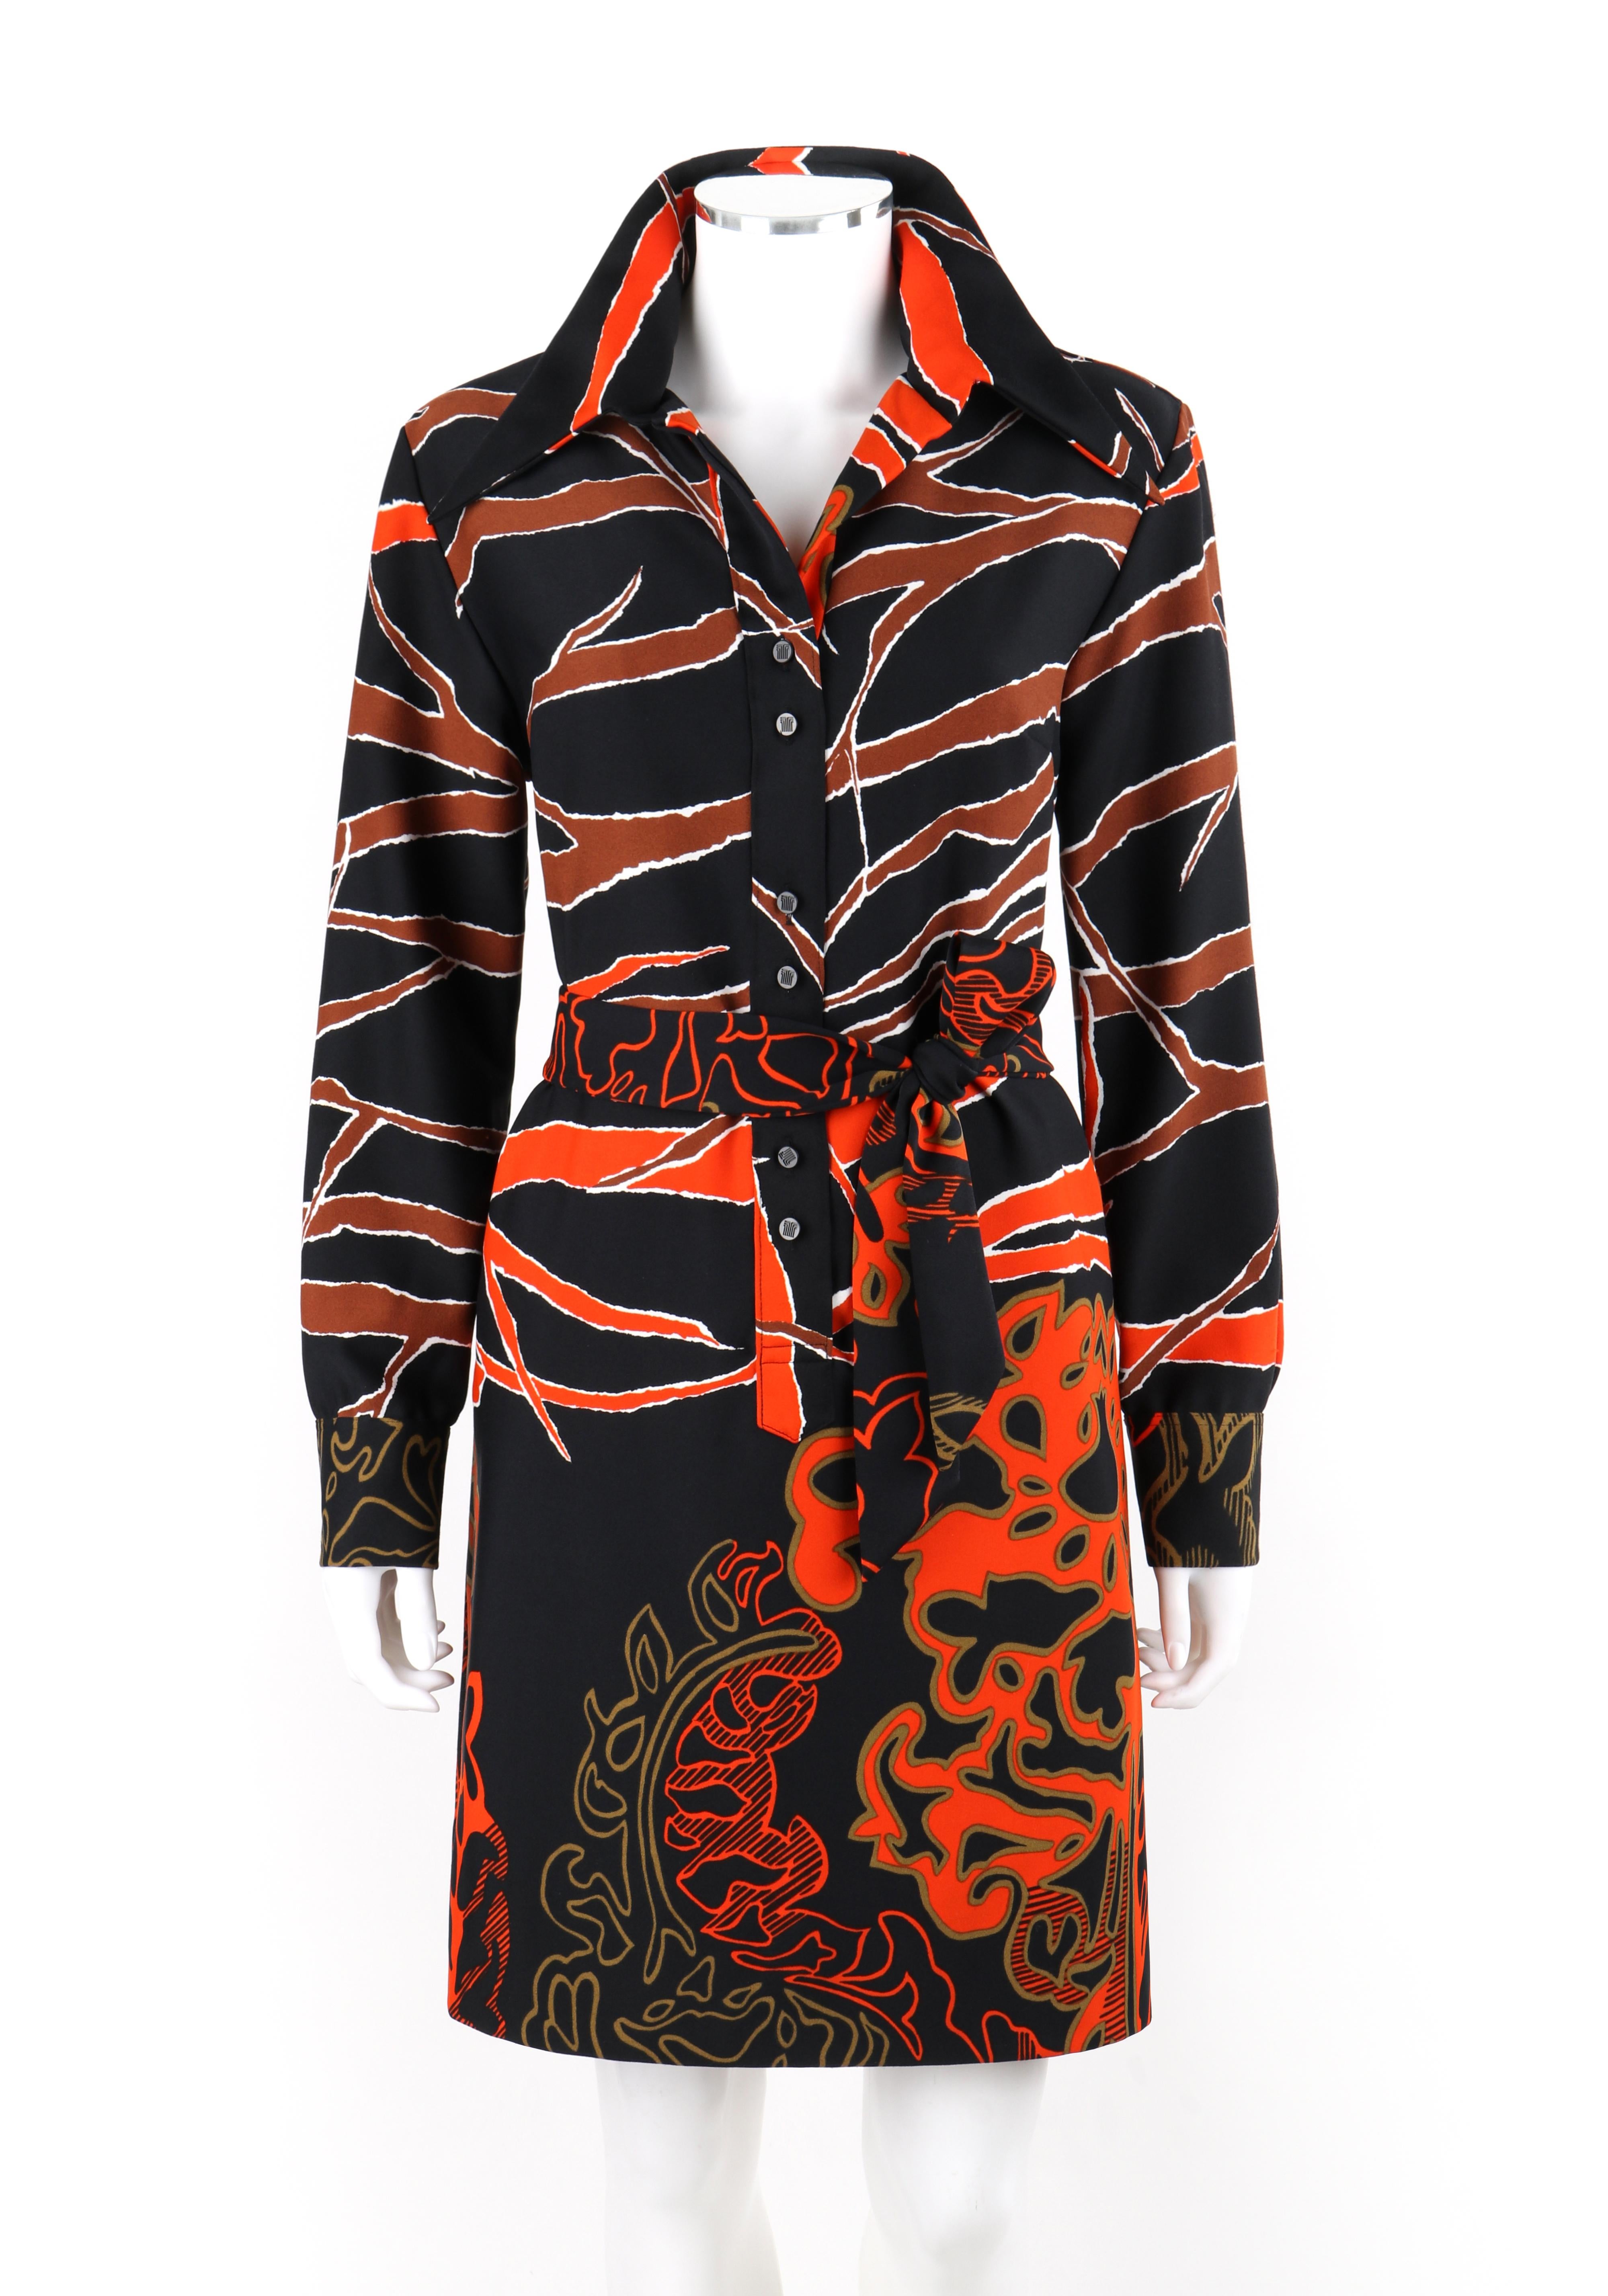 Brand / Manufacturer: Jeanne Lanvin
Circa: 1960s 
Designer: Jeanne Lanvin 
Style: Shirt Dress
Color(s): Shades of blue, orange, brown, white, gold
Lined: No
Unmarked Fabric Content (feel of): Rayon (primary material)
Additional Details / Inclusions: